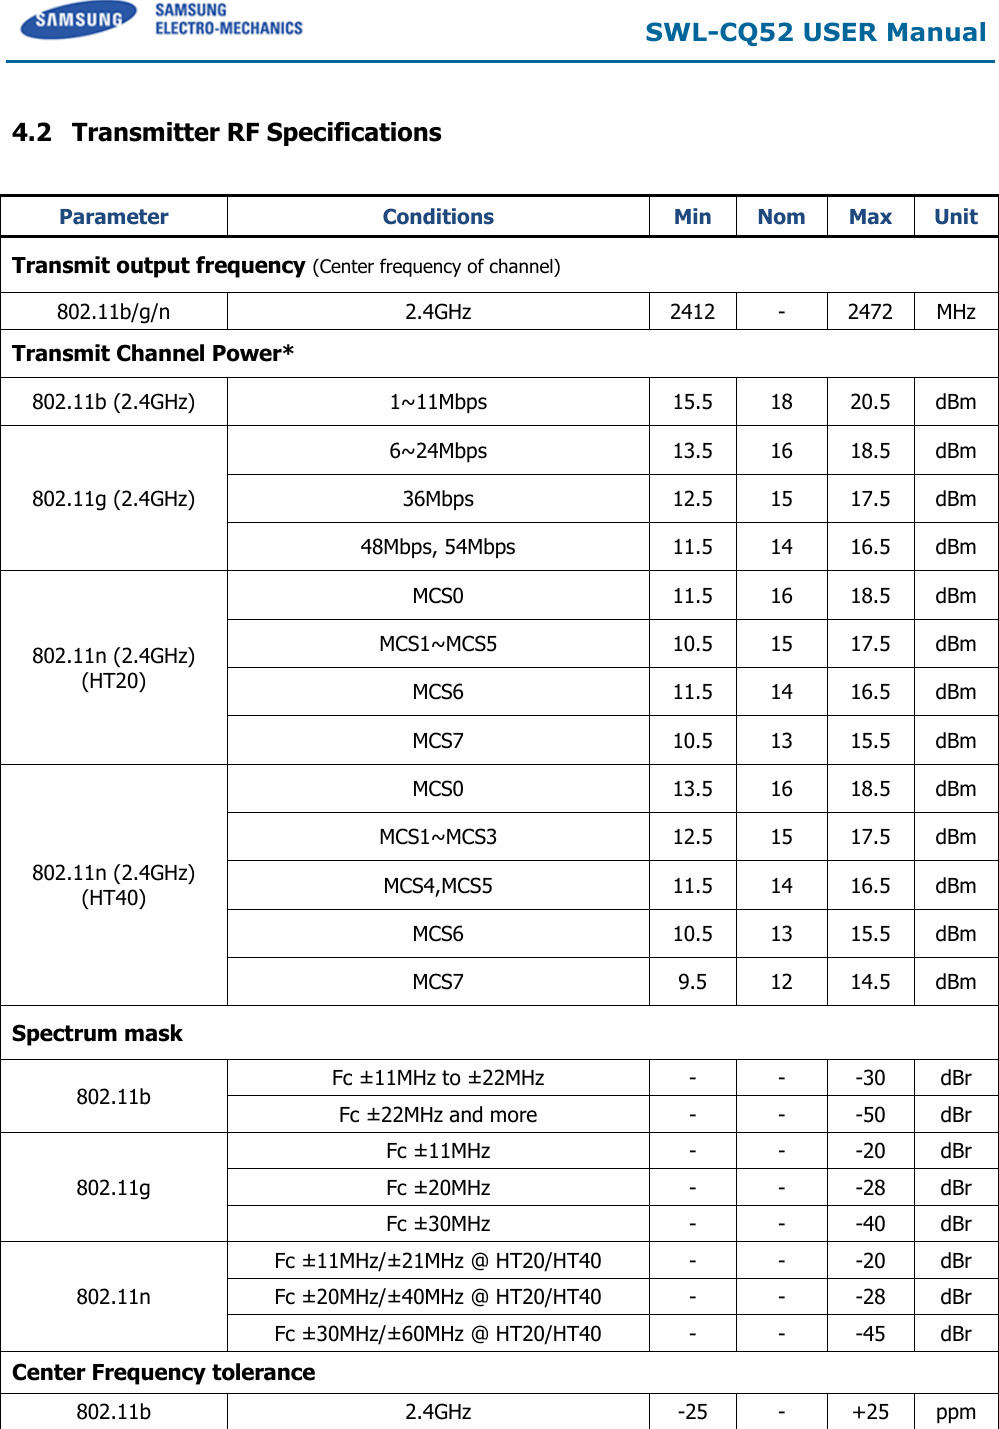 SWL-CQ52 USER Manual 4.2 Transmitter RF Specifications Parameter Conditions Min Nom Max Unit Transmit output frequency (Center frequency of channel) 802.11b/g/n 2.4GHz 2412 - 2472 MHz Transmit Channel Power* 802.11b (2.4GHz) 1~11Mbps 15.5 18 20.5 dBm 802.11g (2.4GHz) 6~24Mbps 13.5 16 18.5 dBm 36Mbps 12.5 15 17.5 dBm 48Mbps, 54Mbps 11.5 14 16.5 dBm 802.11n (2.4GHz) (HT20) MCS0 11.5 16 18.5 dBm MCS1~MCS5 10.5 15 17.5 dBm MCS6 11.5 14 16.5 dBm MCS7 10.5 13 15.5 dBm 802.11n (2.4GHz) (HT40) MCS0 13.5 16 18.5 dBm MCS1~MCS3 12.5 15 17.5 dBm MCS4,MCS5 11.5 14 16.5 dBm MCS6 10.5 13 15.5 dBm MCS7 9.5 12 14.5 dBm Spectrum mask 802.11b Fc ± 11MHz to ± 22MHz - - -30 dBr Fc ± 22MHz and more - - -50 dBr 802.11g Fc ± 11MHz - - -20 dBr Fc ± 20MHz - - -28 dBr Fc ± 30MHz - - -40 dBr 802.11n Fc ± 11MHz/± 21MHz @ HT20/HT40 - - -20 dBr Fc ± 20MHz/± 40MHz @ HT20/HT40 - - -28 dBr Fc ± 30MHz/± 60MHz @ HT20/HT40 - - -45 dBr Center Frequency tolerance 802.11b 2.4GHz -25 - +25 ppm 